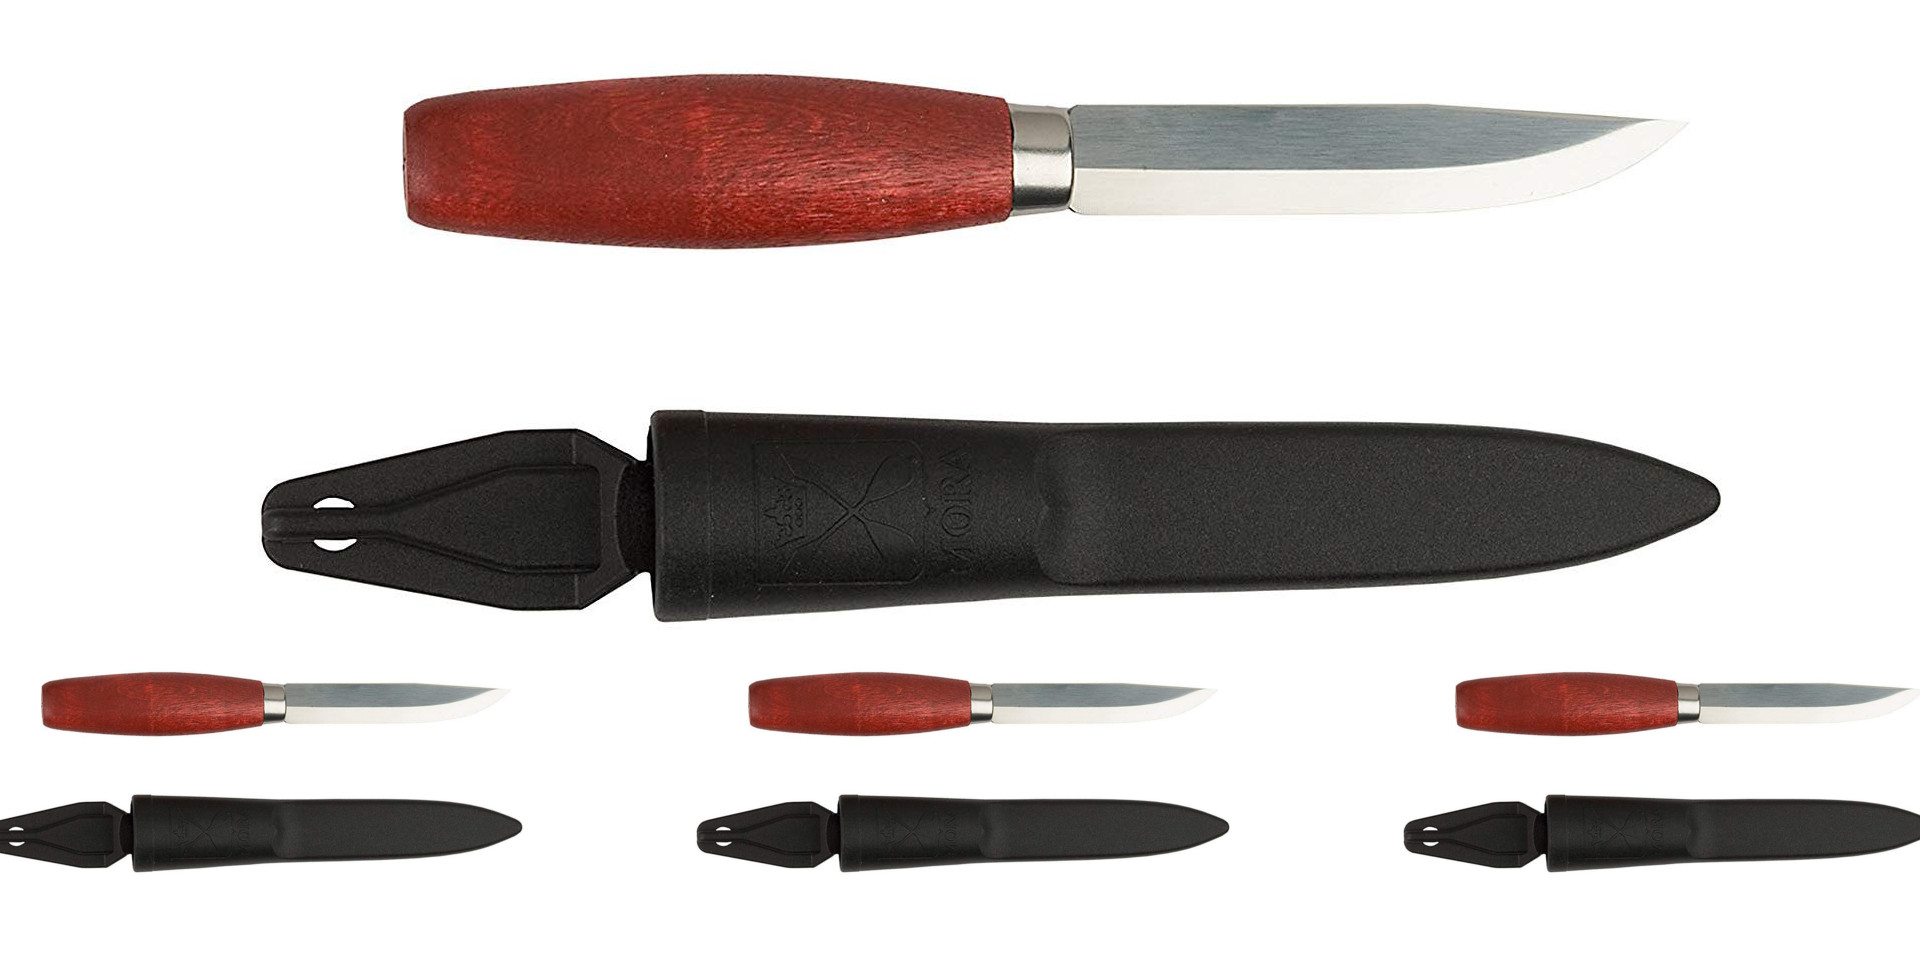 Morakniv Classic No 1 Wood Handle Utility Knife With Carbon Steel